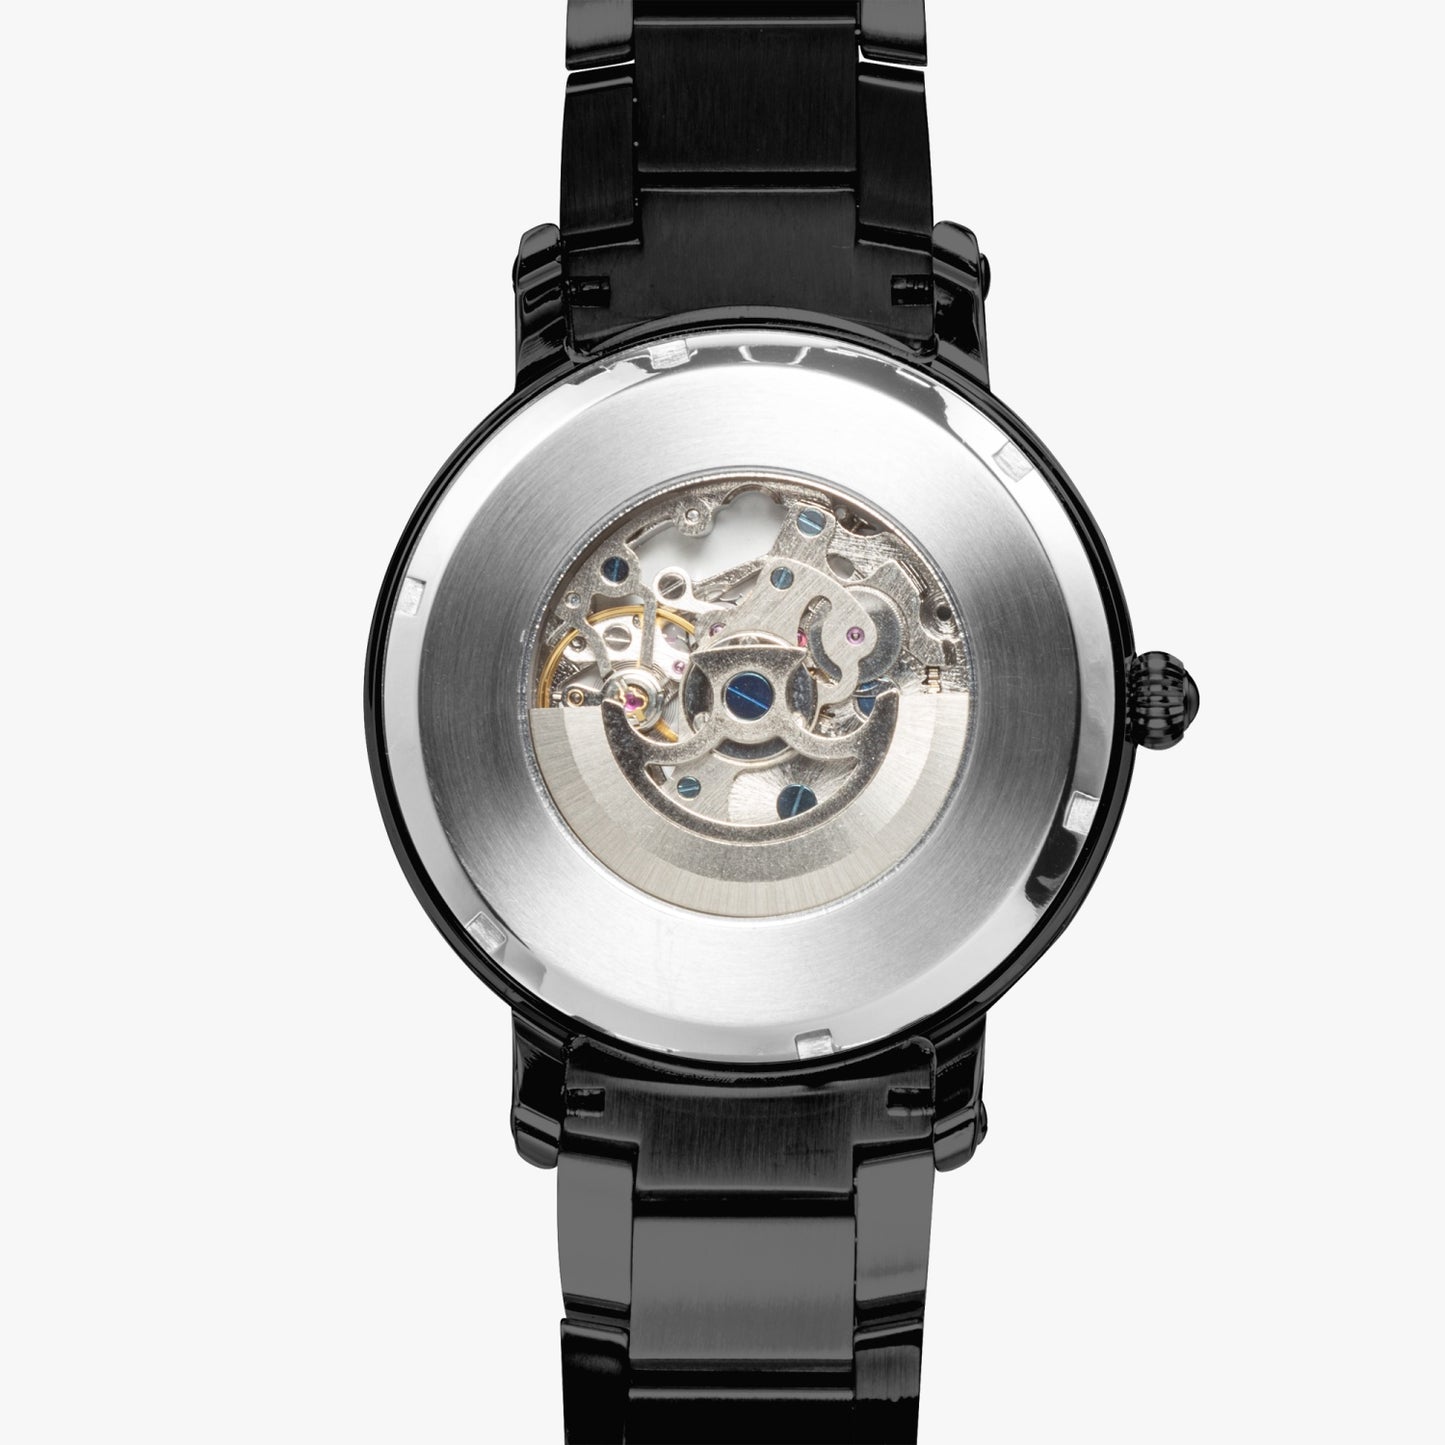 Napoli Automatic Movement Watch - Premium Stainless Steel